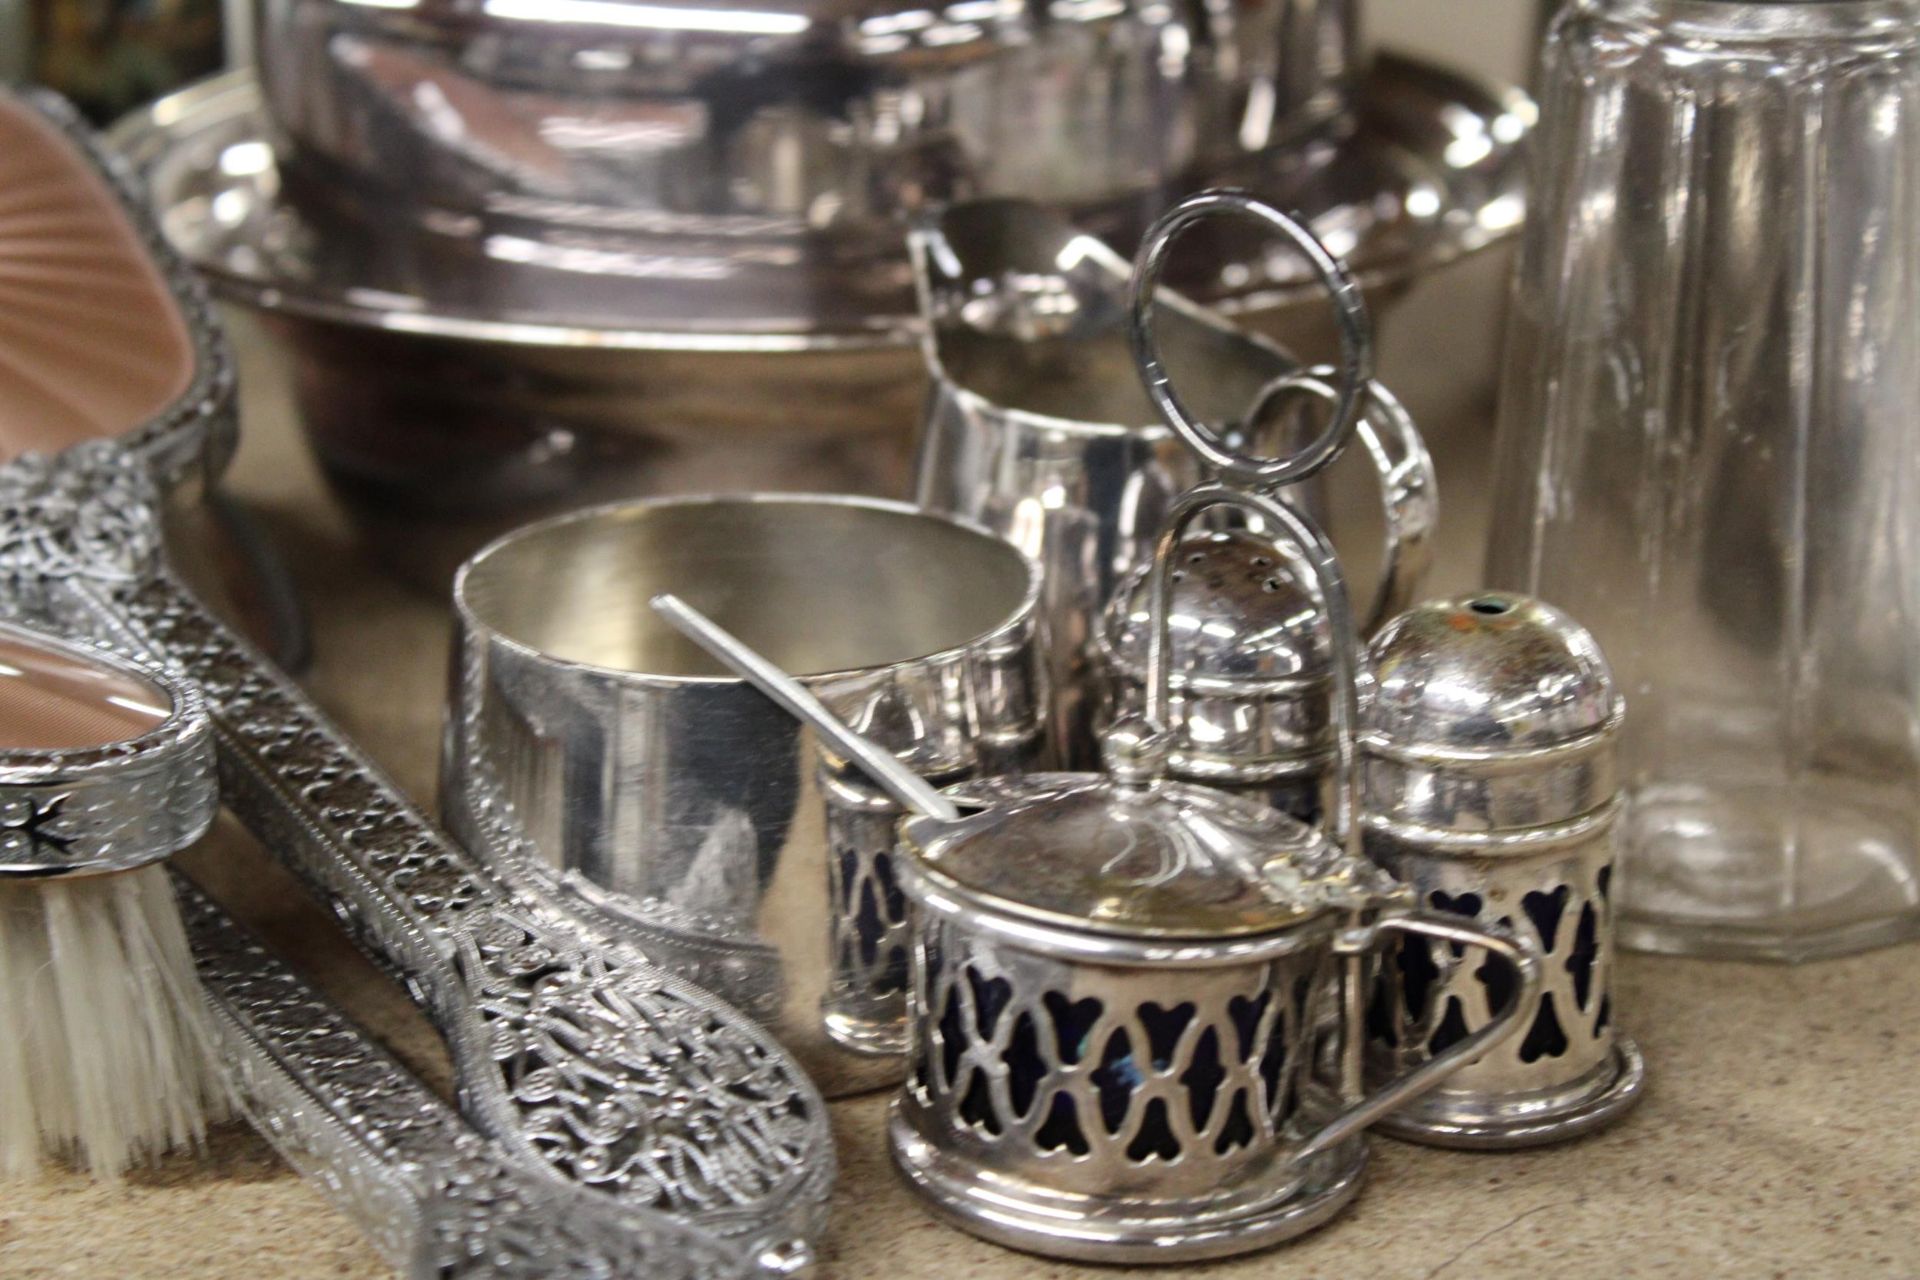 A QUANTITY OF SILVER PLATED ITEMS TO INCLUDE A MUFFIN DISH, TEAPOT AND HOT WATER JUG, SUGAR - Image 3 of 5